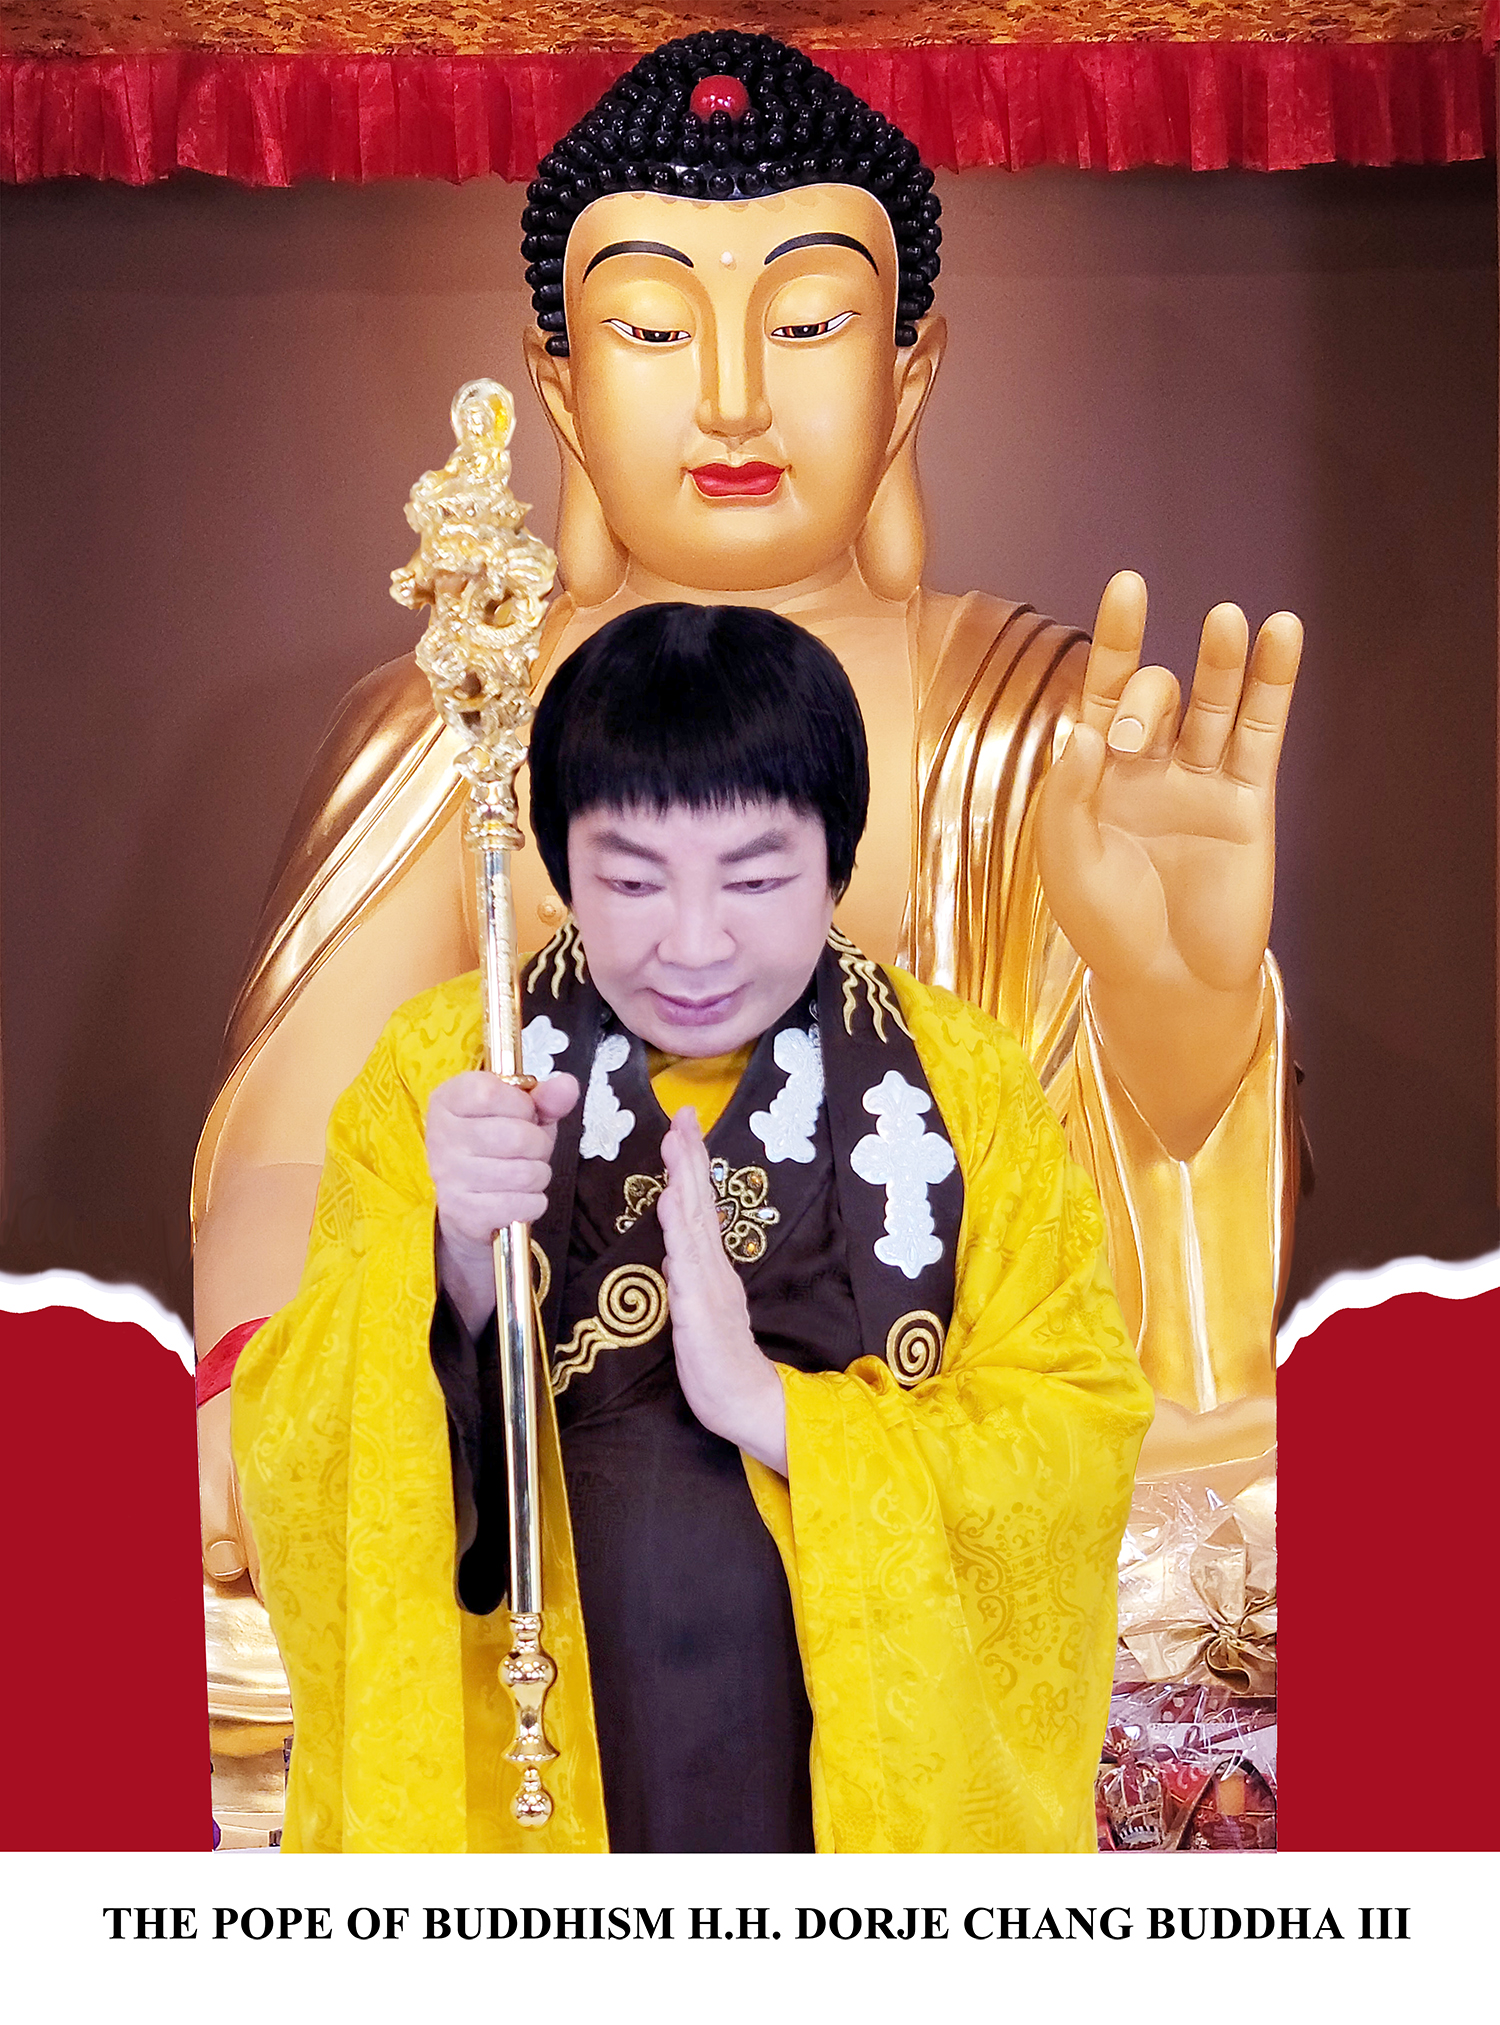 The Pope of Buddhism H.H. Dorje Chang Buddha III